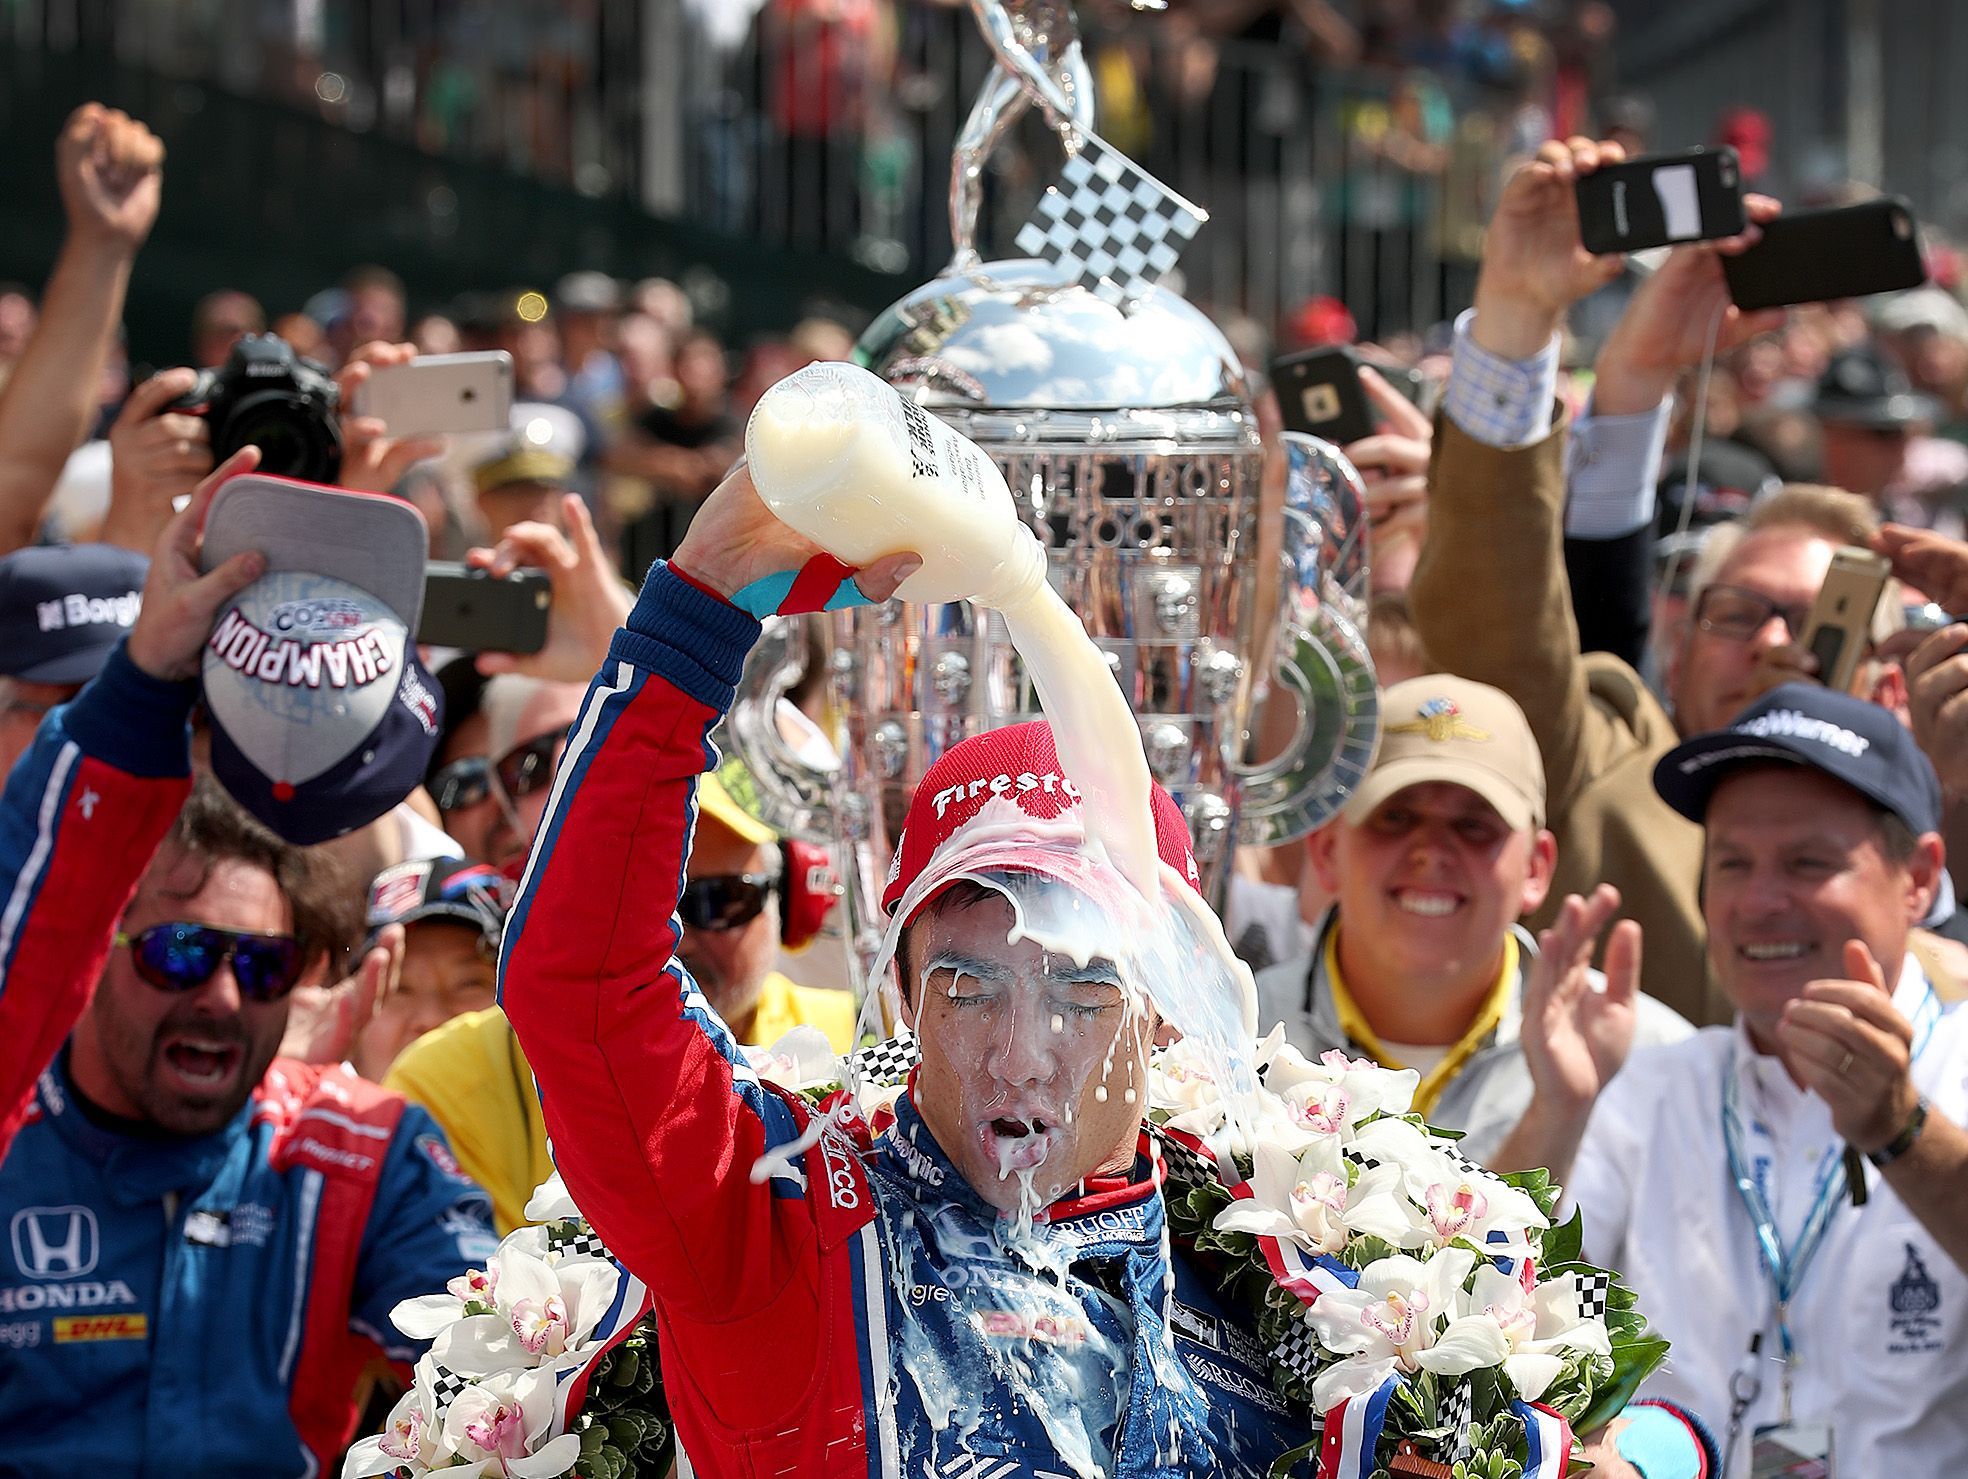 5 things you probably didn’t know about 2017 Indy 500 winner Takuma